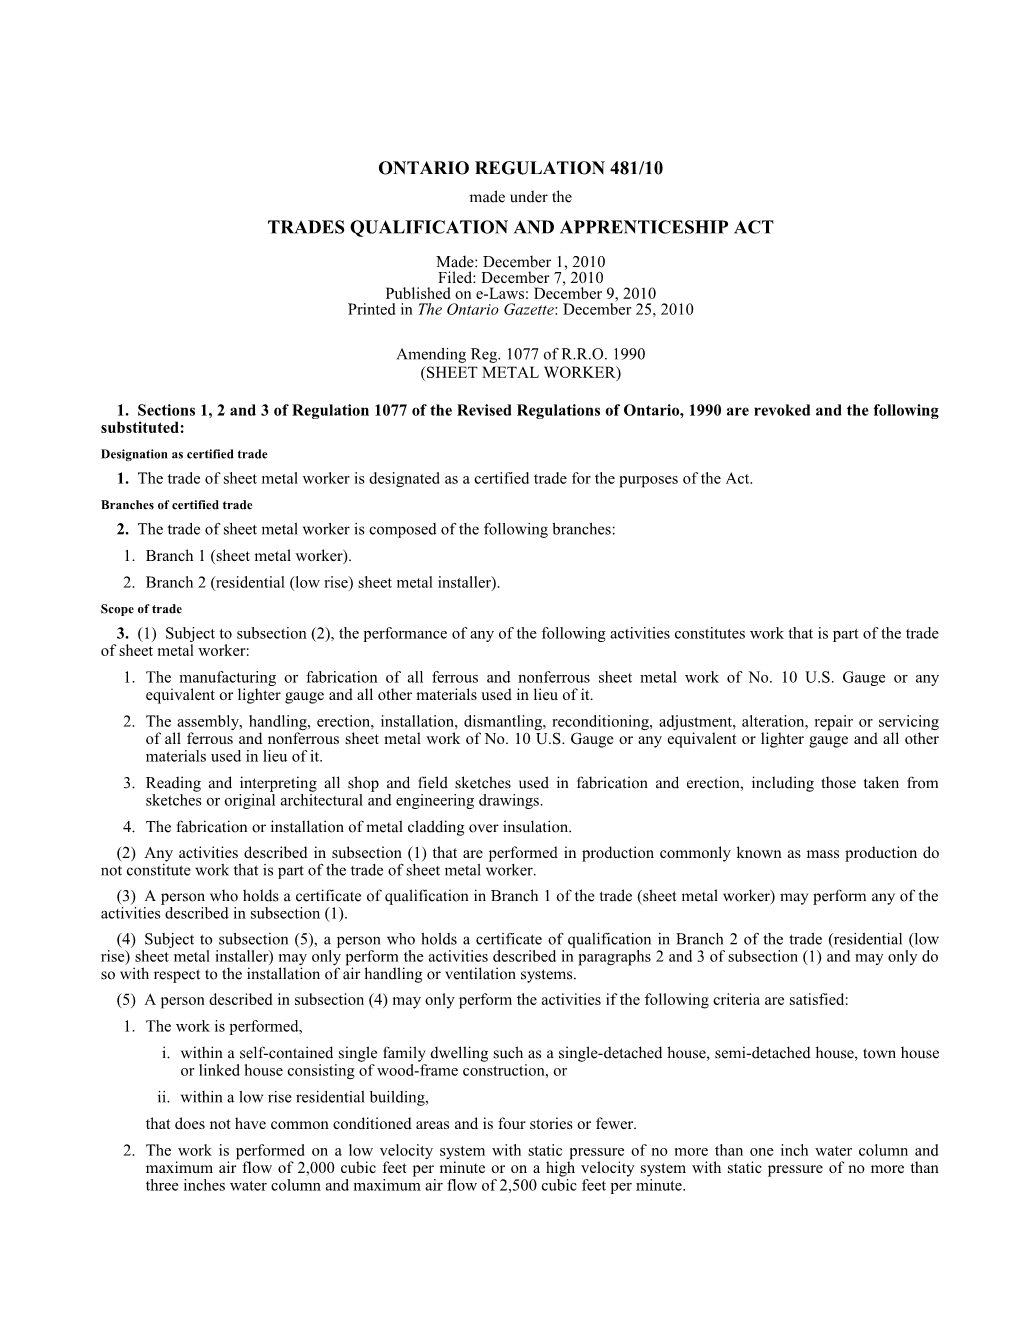 TRADES QUALIFICATION and APPRENTICESHIP ACT - O. Reg. 481/10